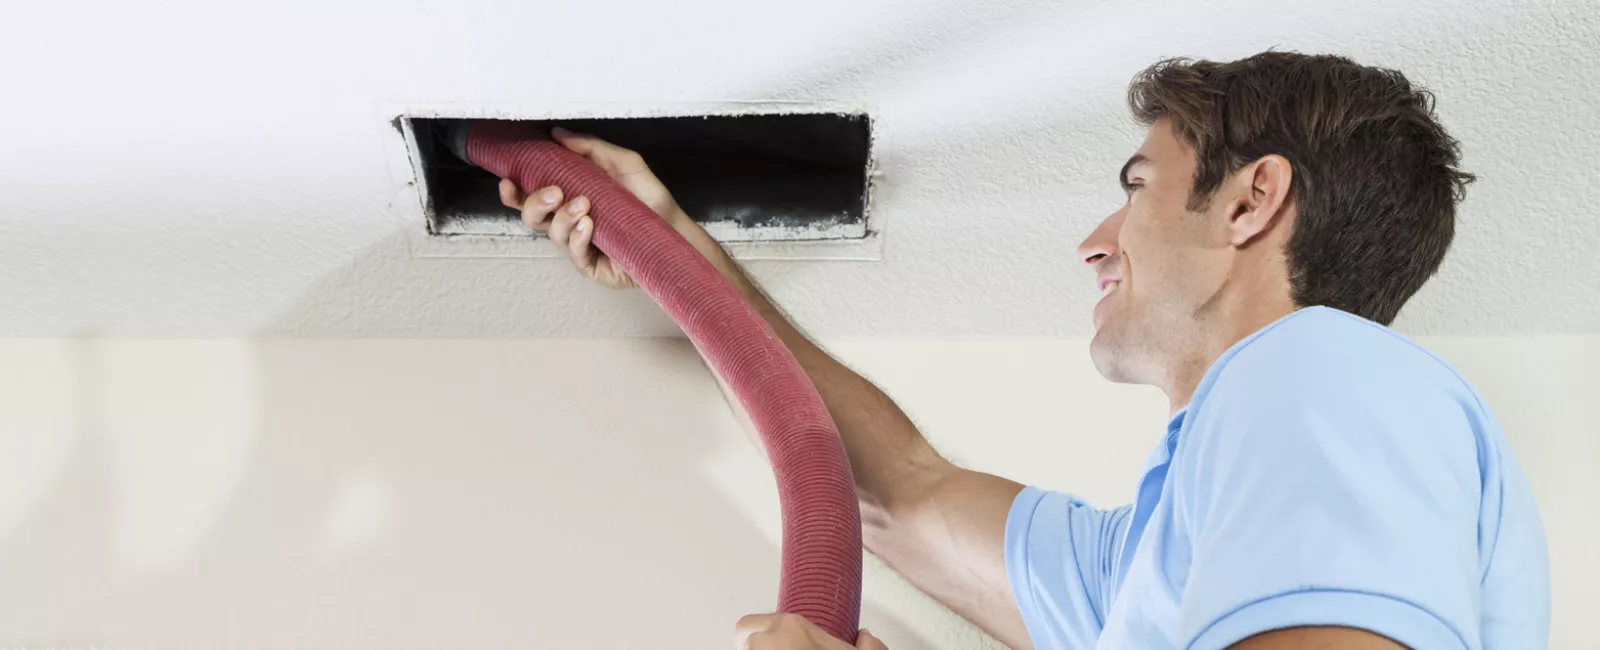  Air Duct Cleaning Cost Near Me in Katy TX